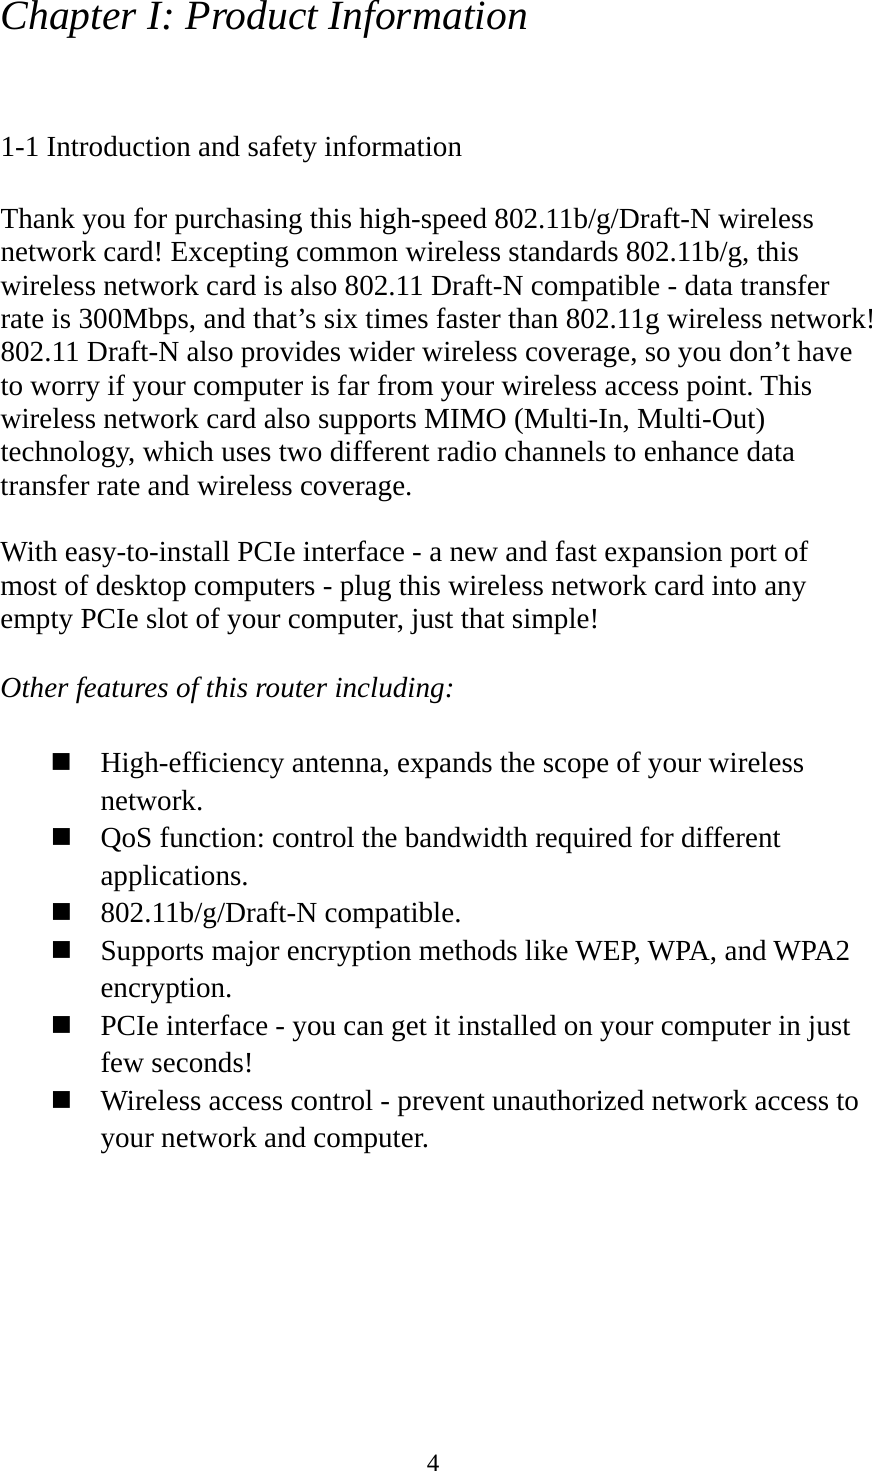  4Chapter I: Product Information  1-1 Introduction and safety information  Thank you for purchasing this high-speed 802.11b/g/Draft-N wireless network card! Excepting common wireless standards 802.11b/g, this wireless network card is also 802.11 Draft-N compatible - data transfer rate is 300Mbps, and that’s six times faster than 802.11g wireless network! 802.11 Draft-N also provides wider wireless coverage, so you don’t have to worry if your computer is far from your wireless access point. This wireless network card also supports MIMO (Multi-In, Multi-Out) technology, which uses two different radio channels to enhance data transfer rate and wireless coverage.  With easy-to-install PCIe interface - a new and fast expansion port of most of desktop computers - plug this wireless network card into any empty PCIe slot of your computer, just that simple!  Other features of this router including:   High-efficiency antenna, expands the scope of your wireless network.  QoS function: control the bandwidth required for different applications.  802.11b/g/Draft-N compatible.  Supports major encryption methods like WEP, WPA, and WPA2 encryption.  PCIe interface - you can get it installed on your computer in just few seconds!  Wireless access control - prevent unauthorized network access to your network and computer. 